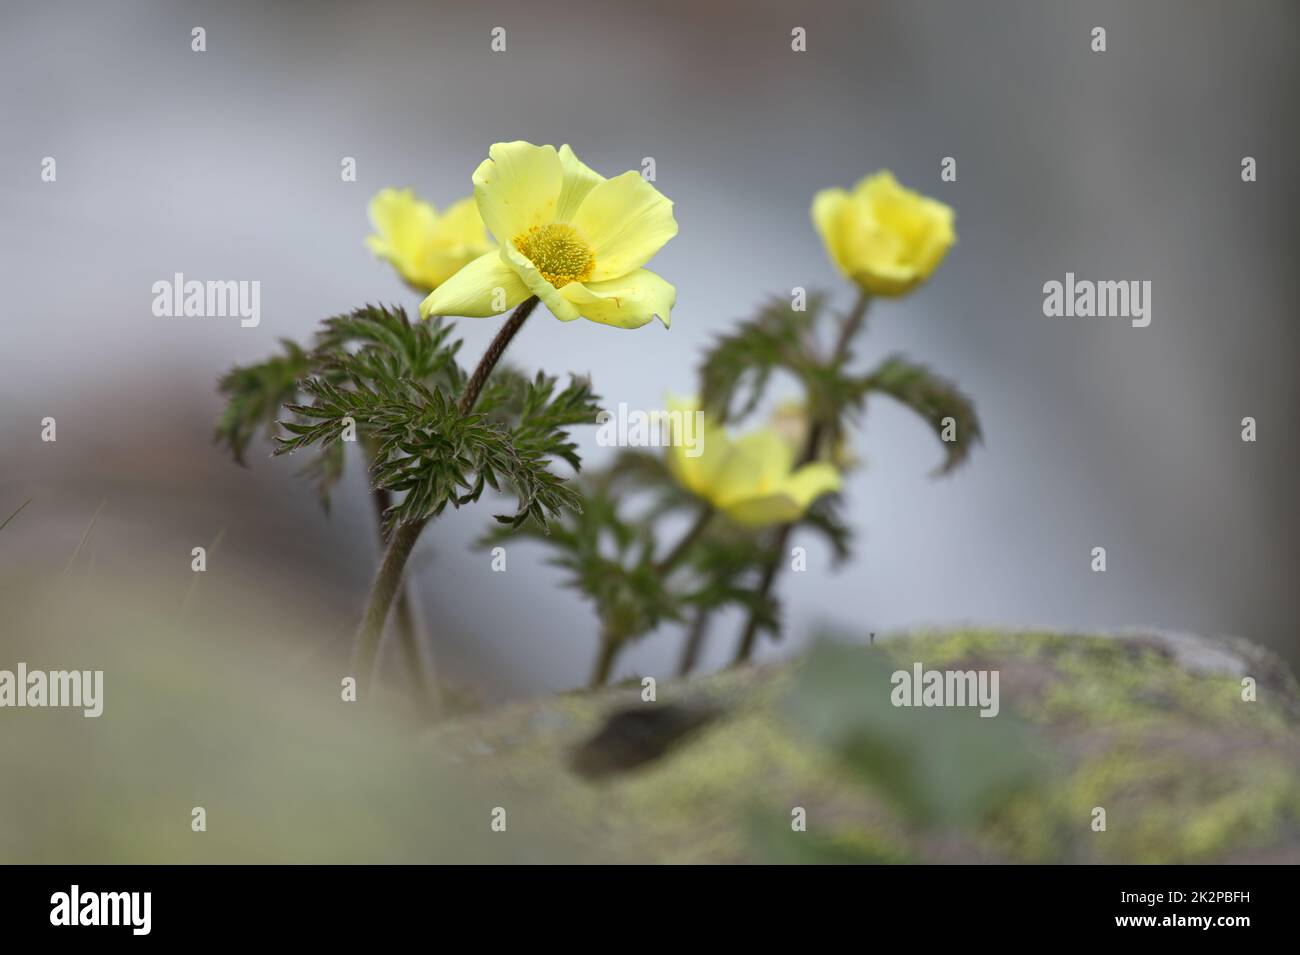 Grown in the rock, in the foreground a flowering plant of Pulsatilla alpina subsp. apiifolia Stock Photo